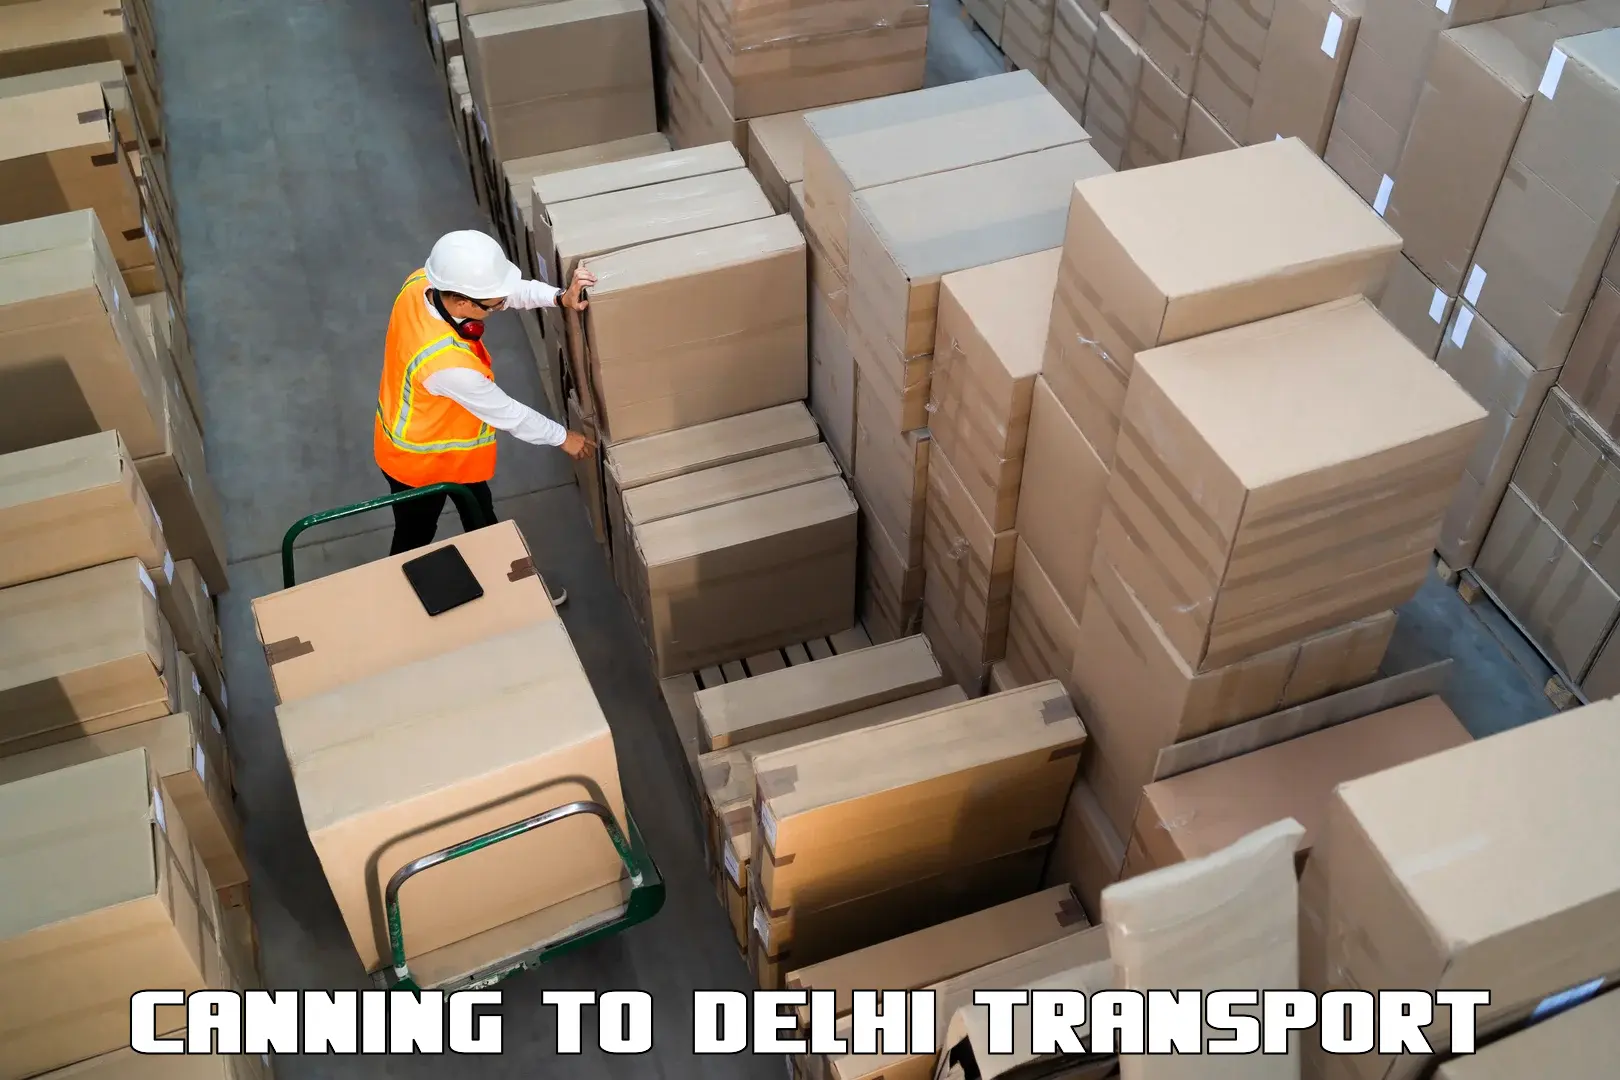 Pick up transport service Canning to University of Delhi